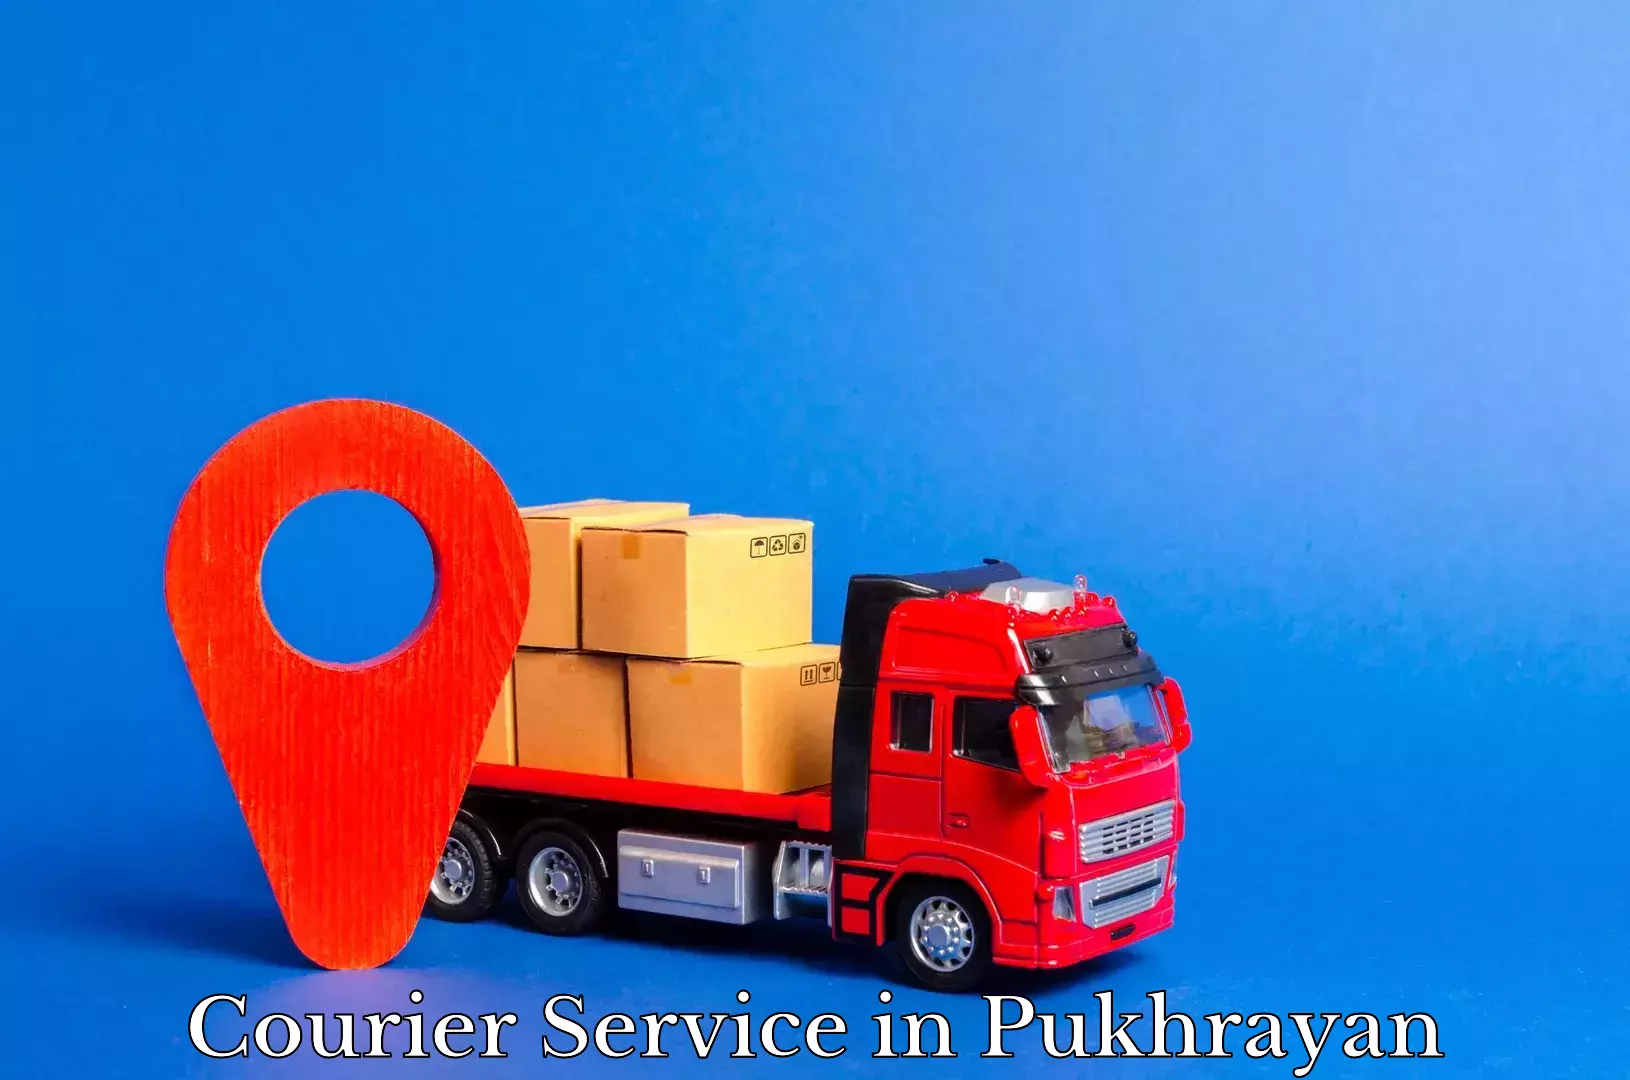 Rapid freight solutions in Pukhrayan